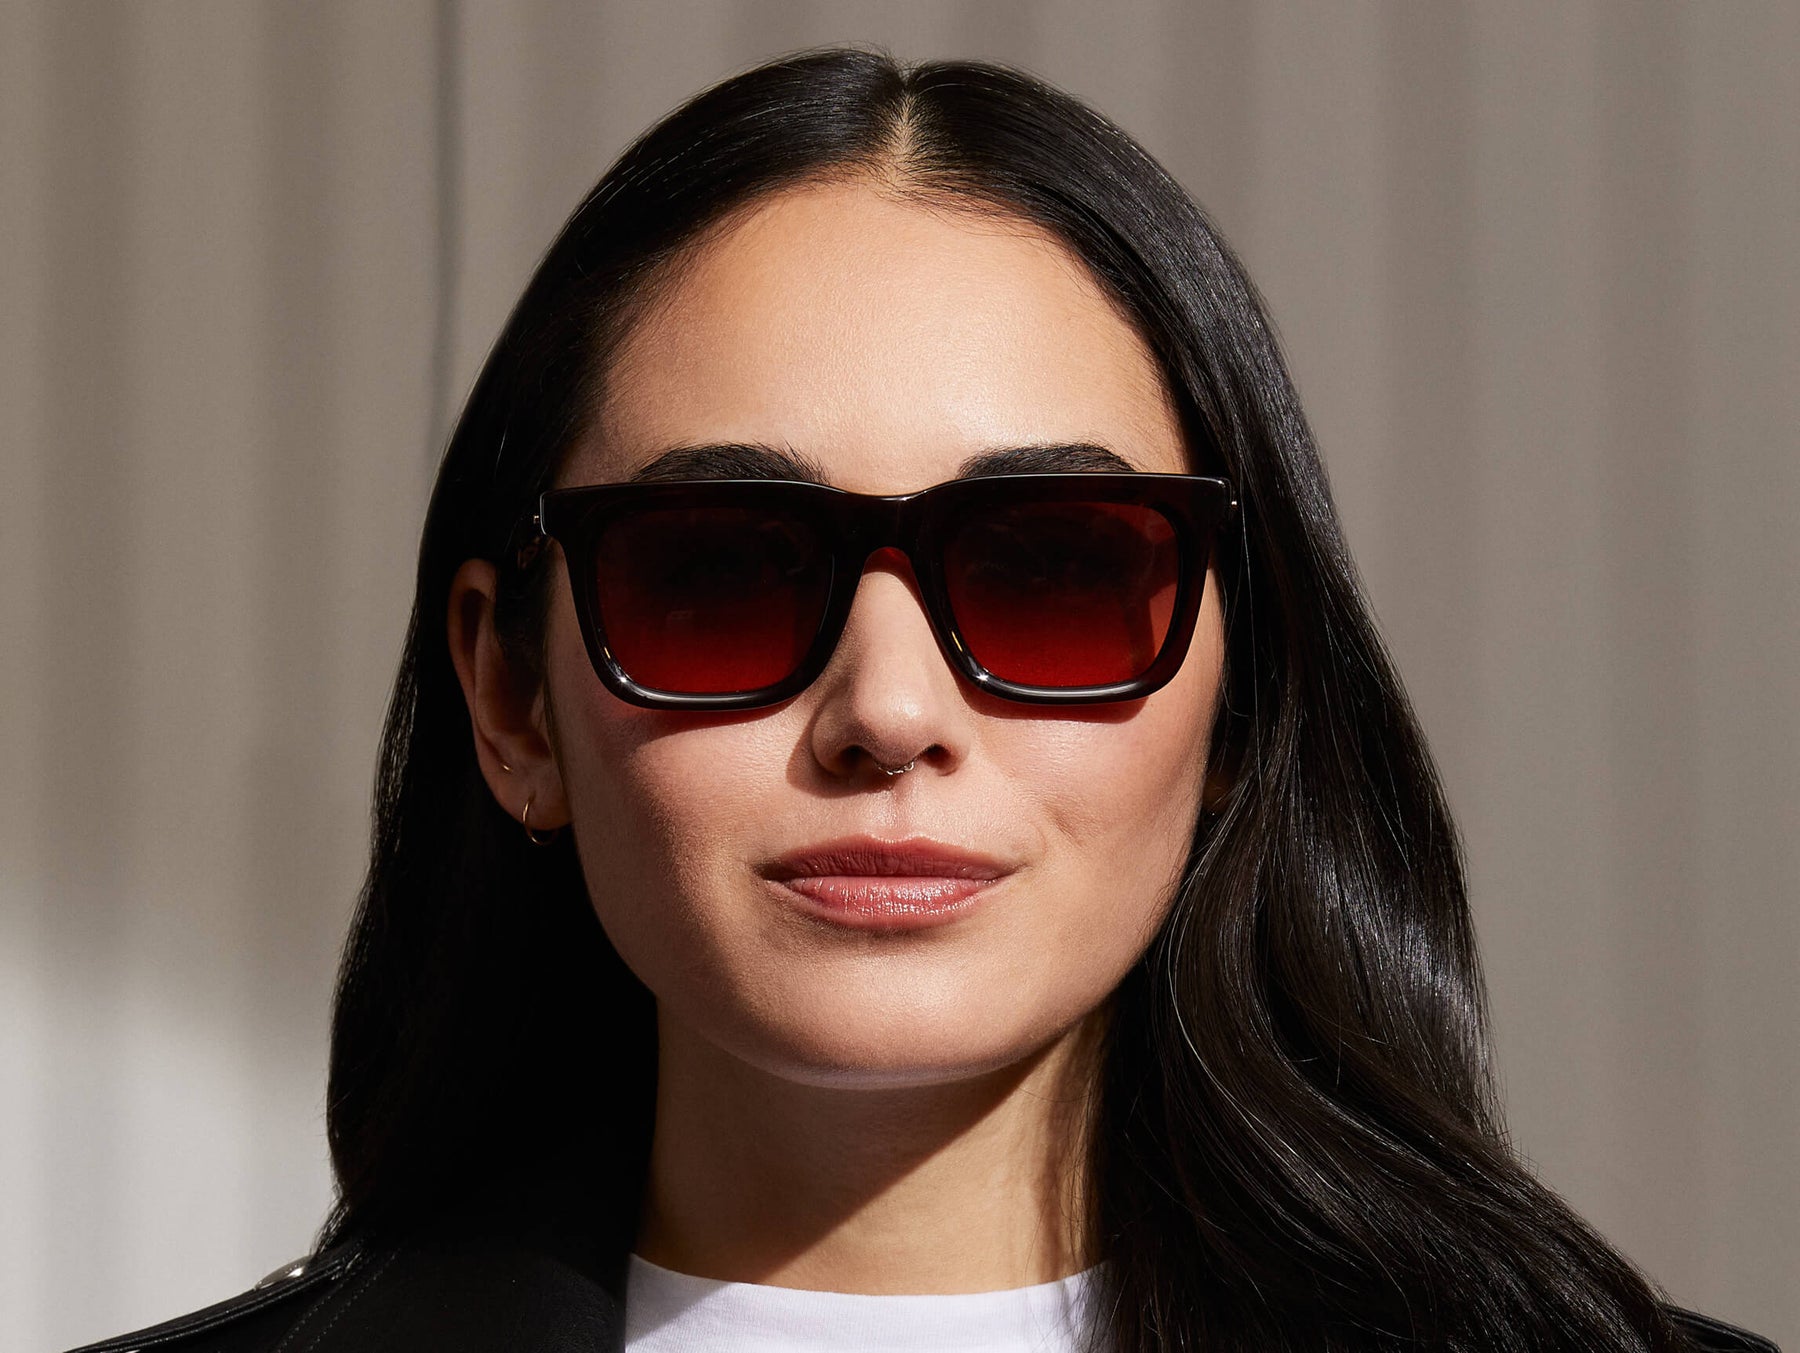 Model is wearing The RIZIK SUN in Burgundy in size 49 with Cabernet Tinted Lenses